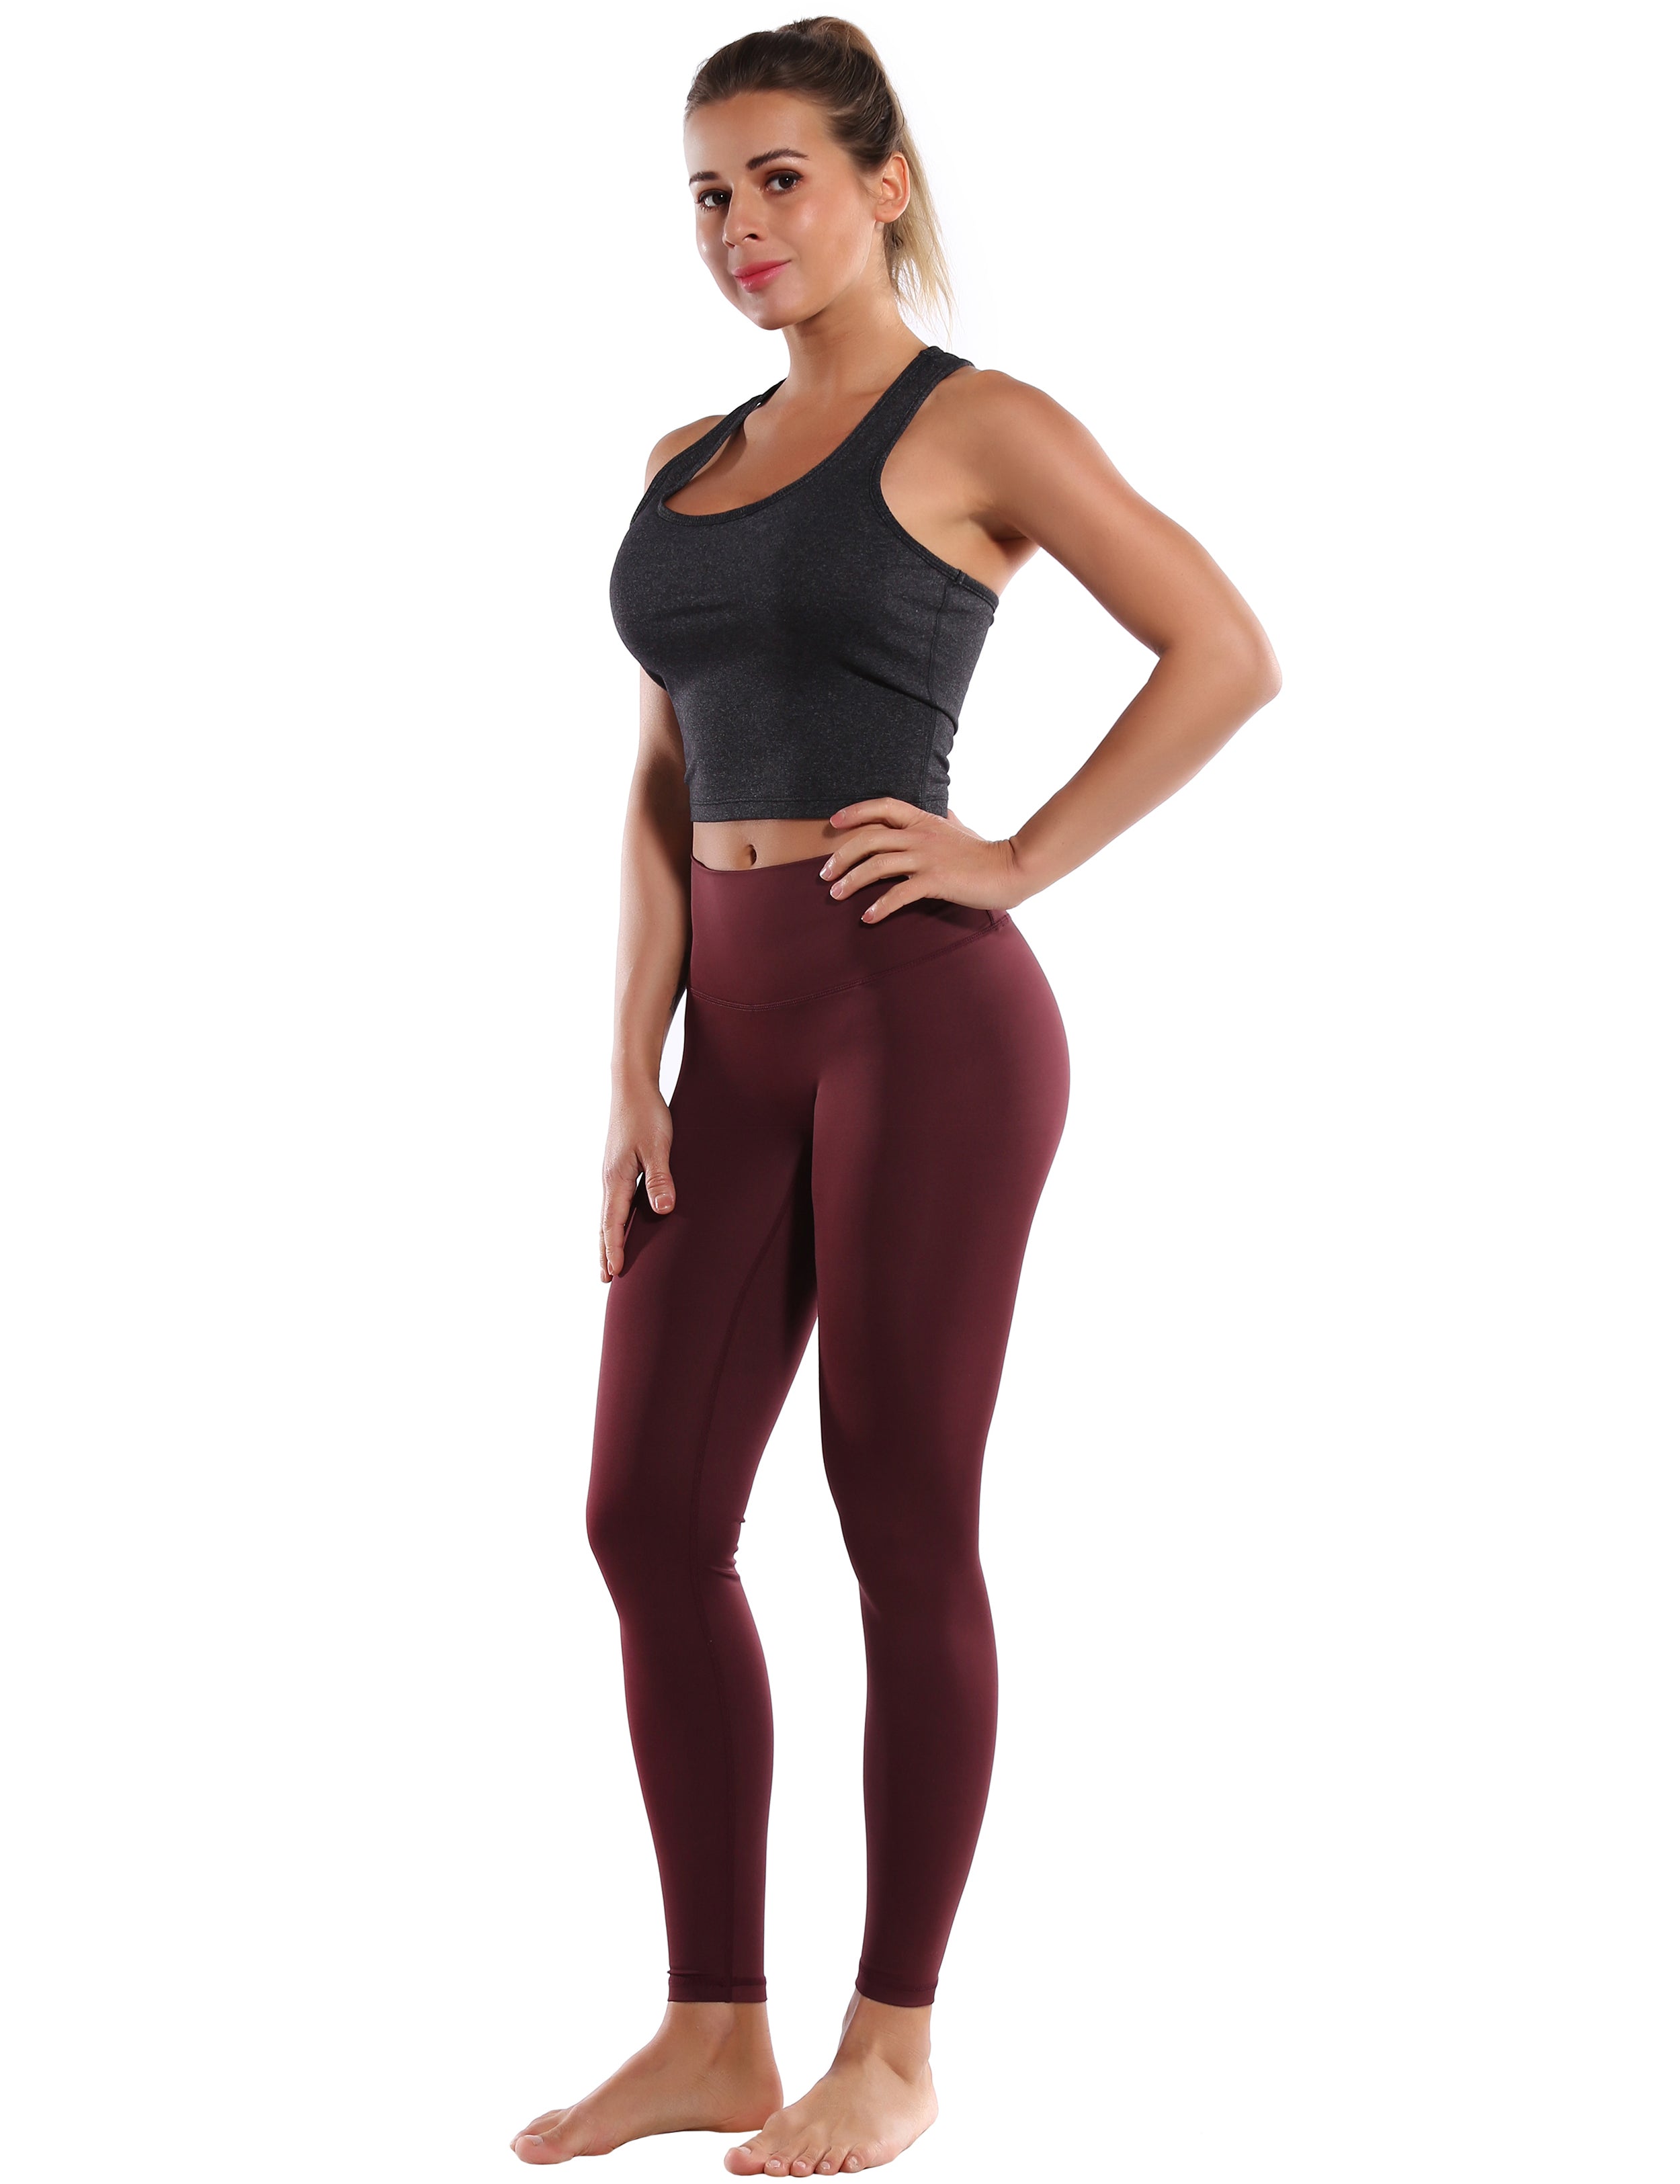 Racerback Athletic Crop Tank Tops heathercharcoal 92%Nylon/8%Spandex(Cotton Soft) Designed for Jogging Tight Fit So buttery soft, it feels weightless Sweat-wicking Four-way stretch Breathable Contours your body Sits below the waistband for moderate, everyday coverage